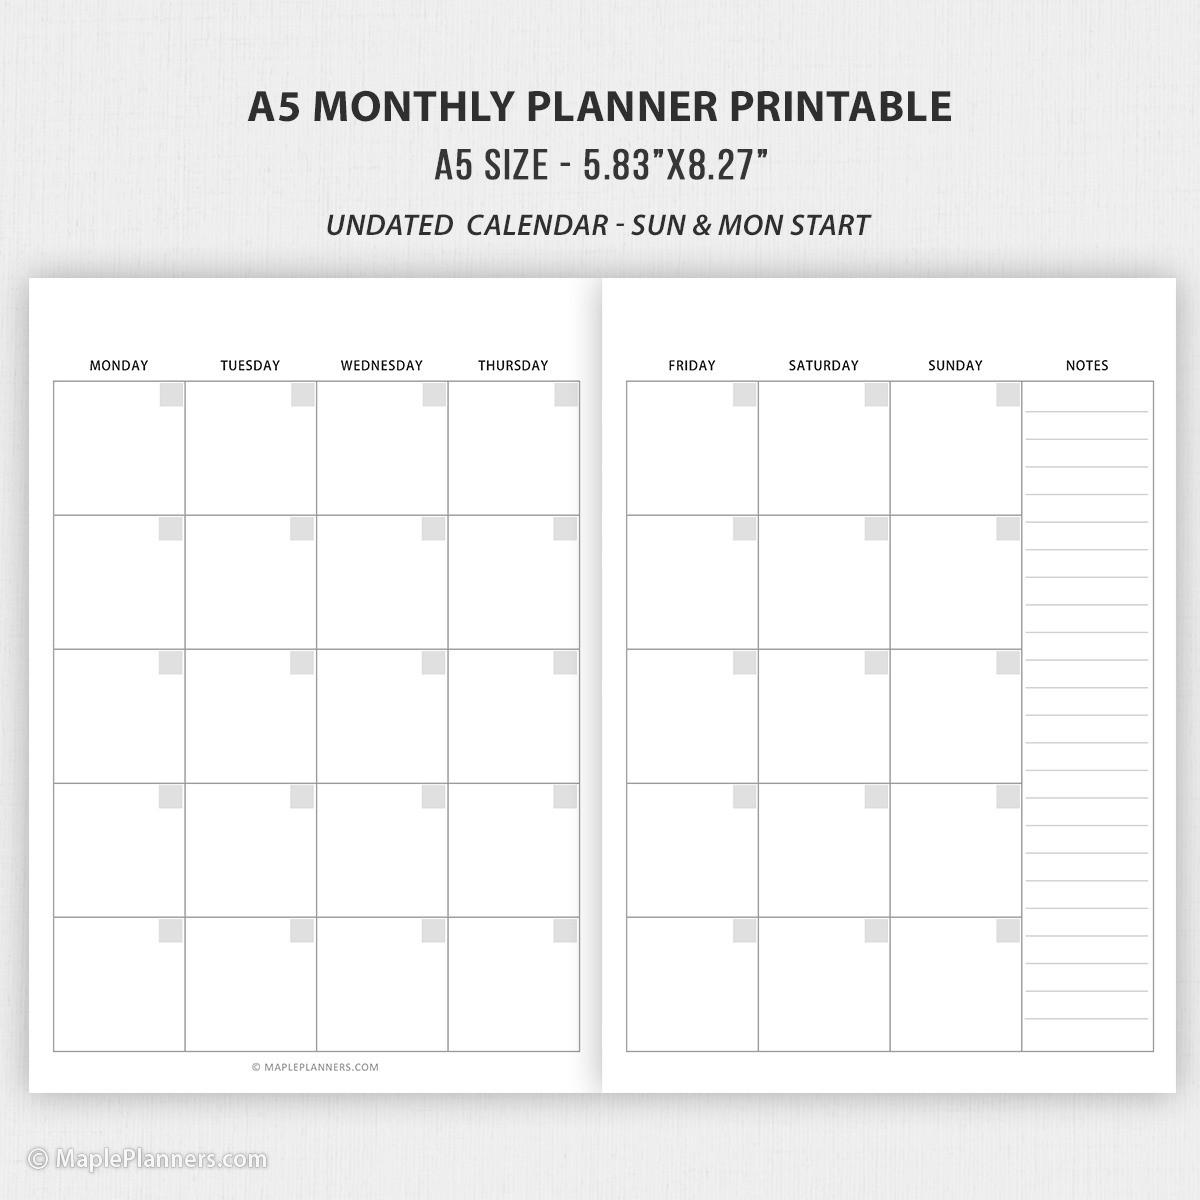 paper-party-supplies-paper-month-on-1-page-notes-calendar-agenda-personal-2021-monthly-planner